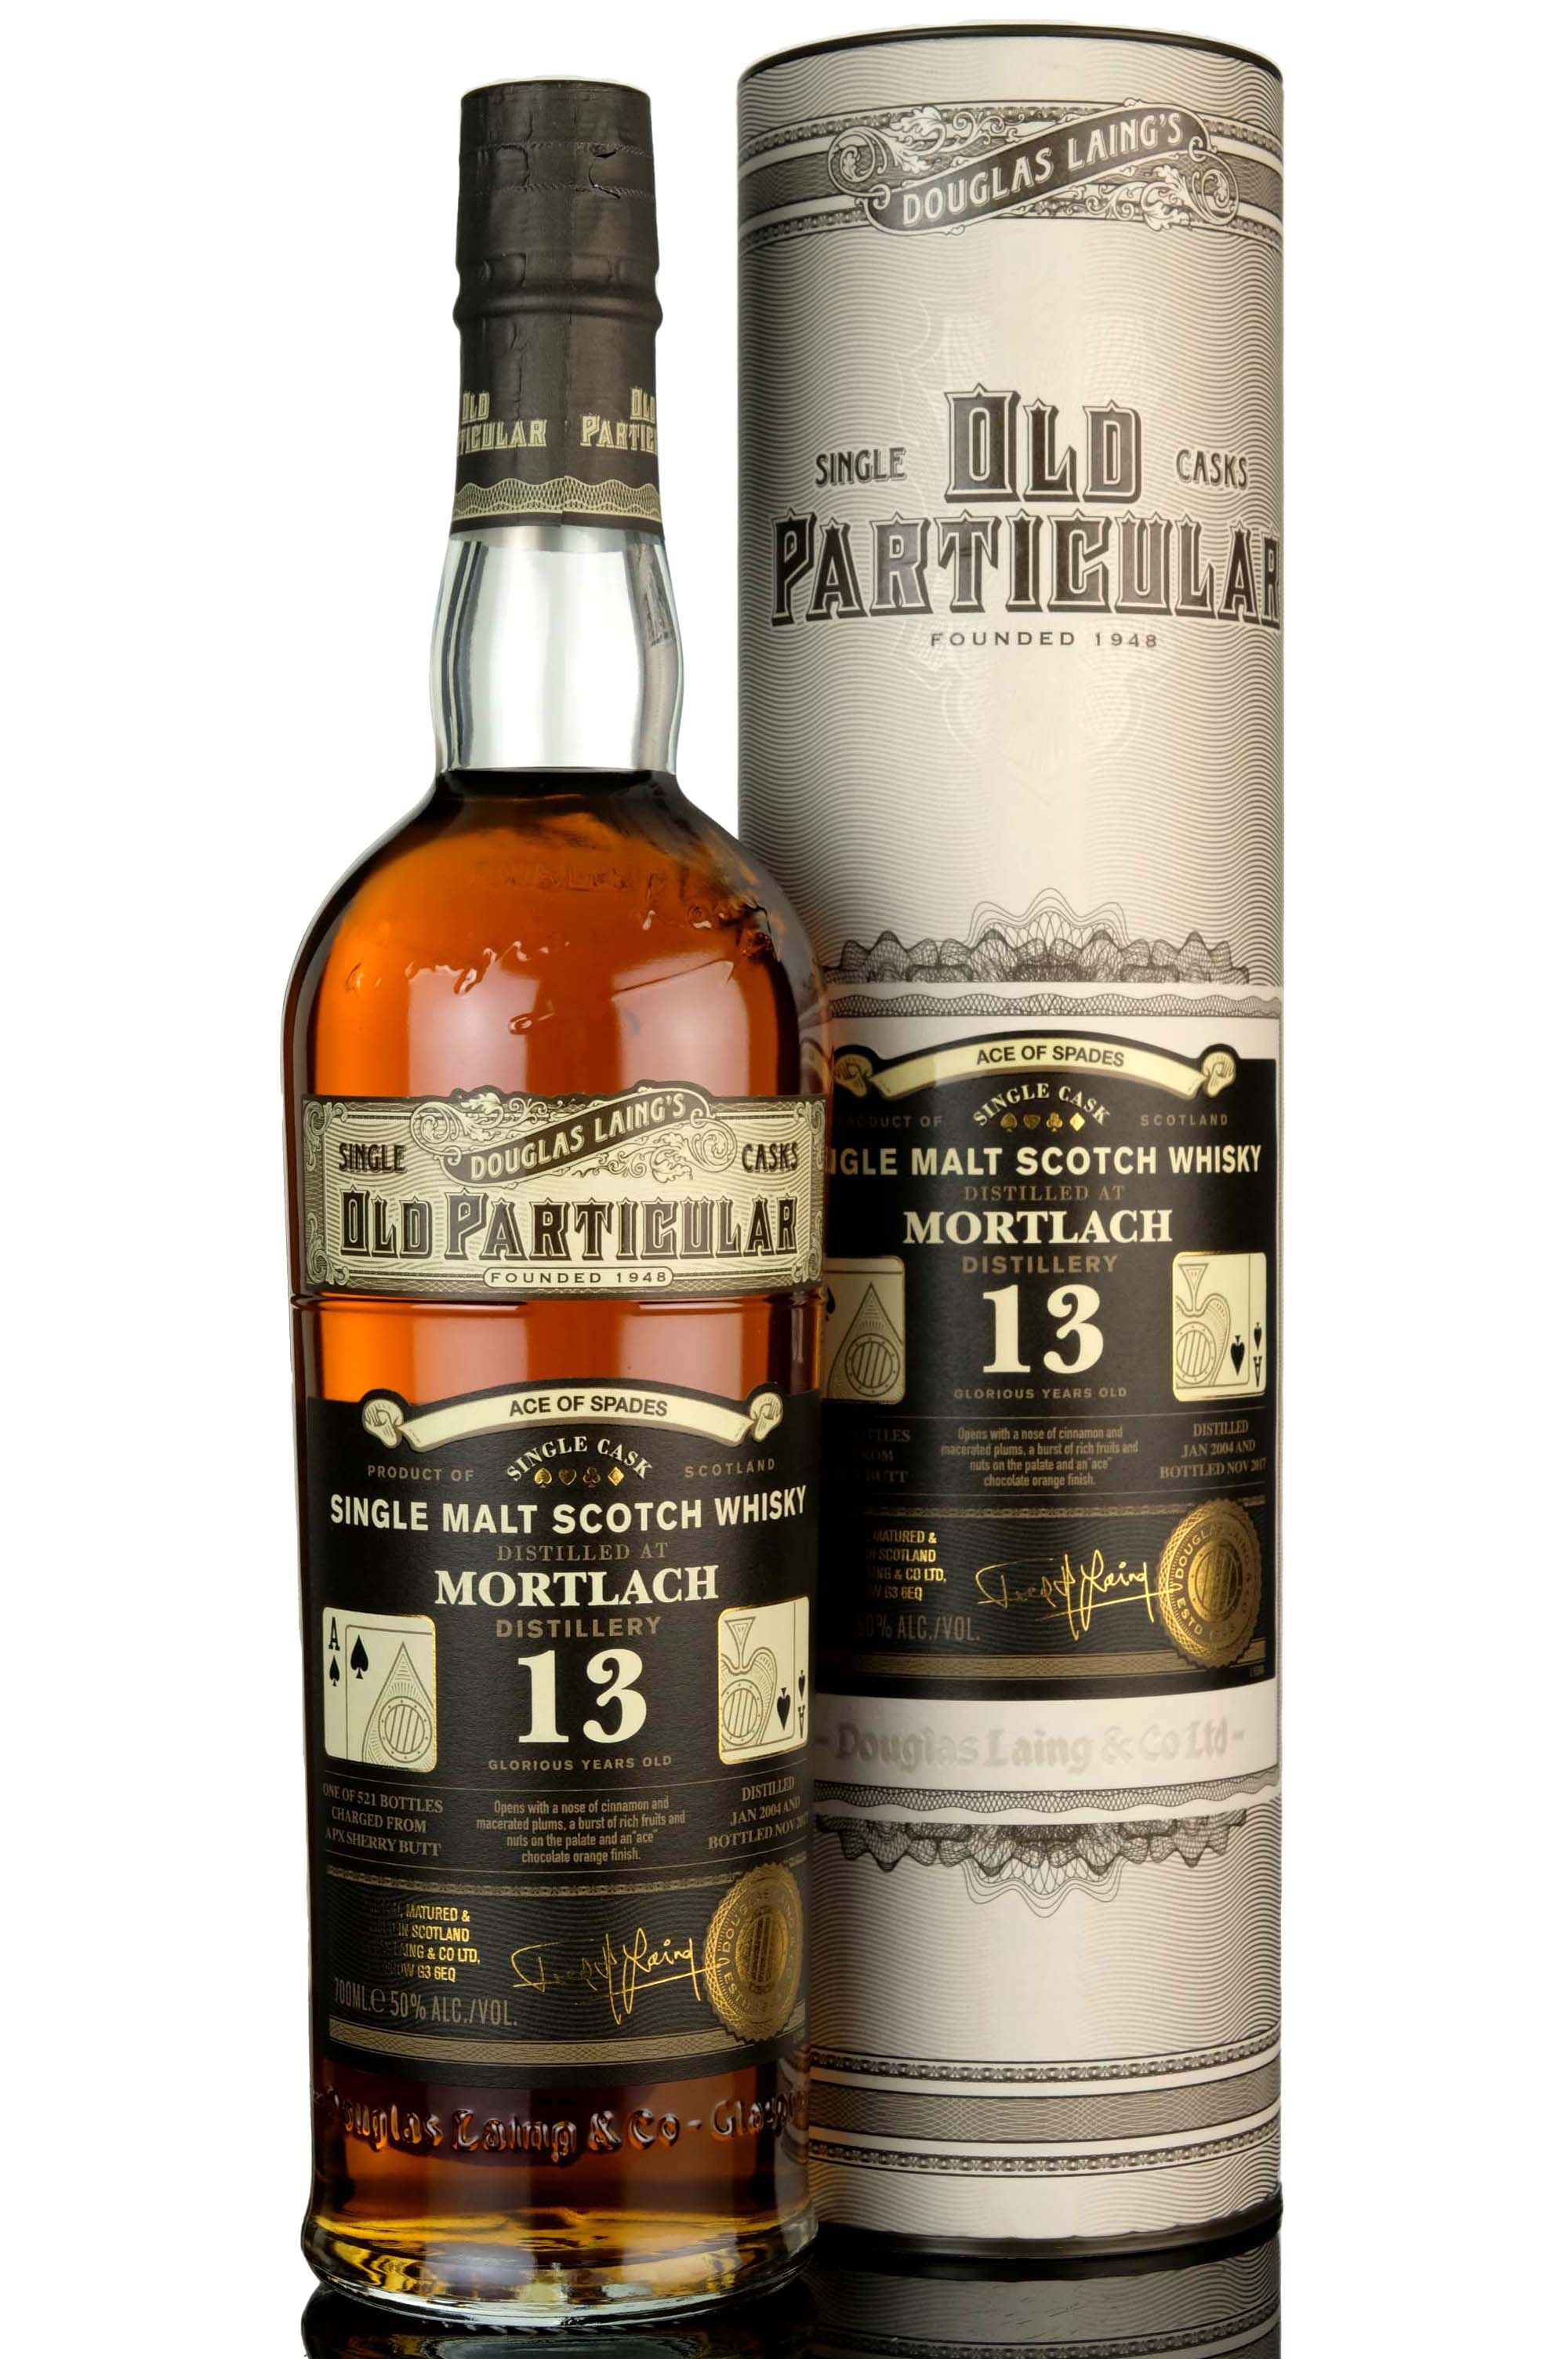 Mortlach 2004-2017 - 13 Year Old - Douglas Laing - Old Particular - Single Cask